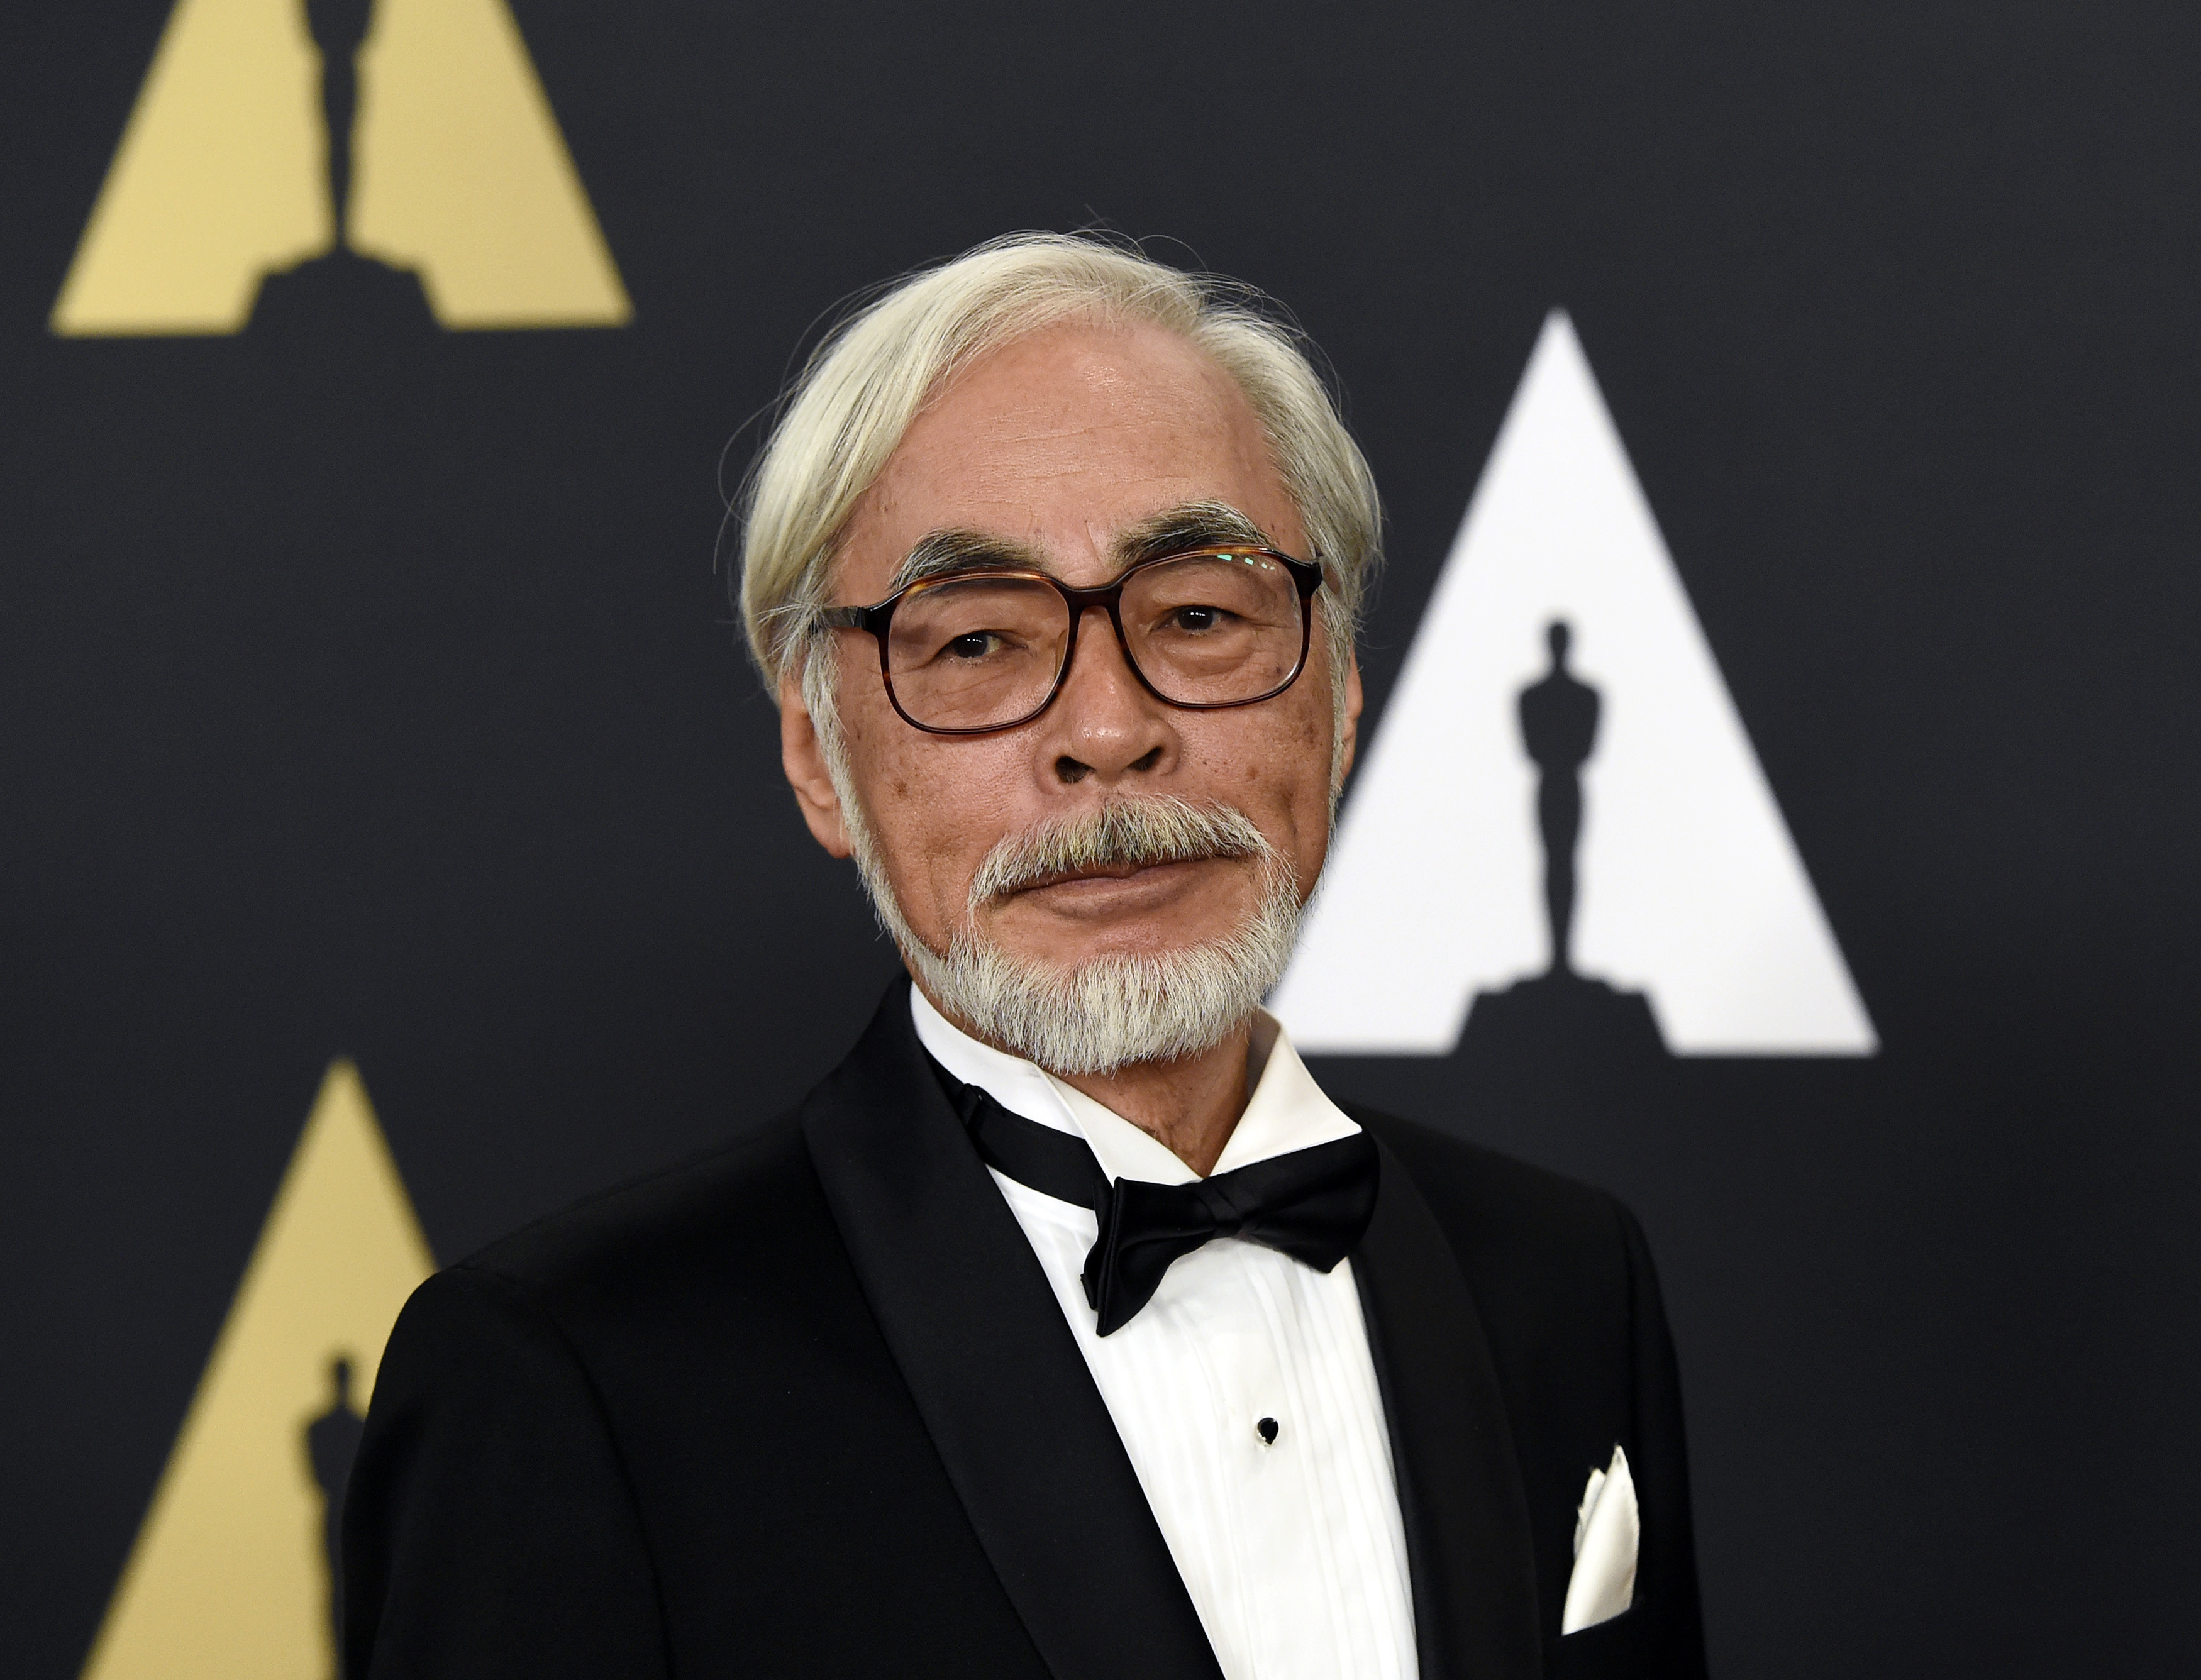 Ghibli's Miyazaki has ideas for next project after 'The Boy and the Heron